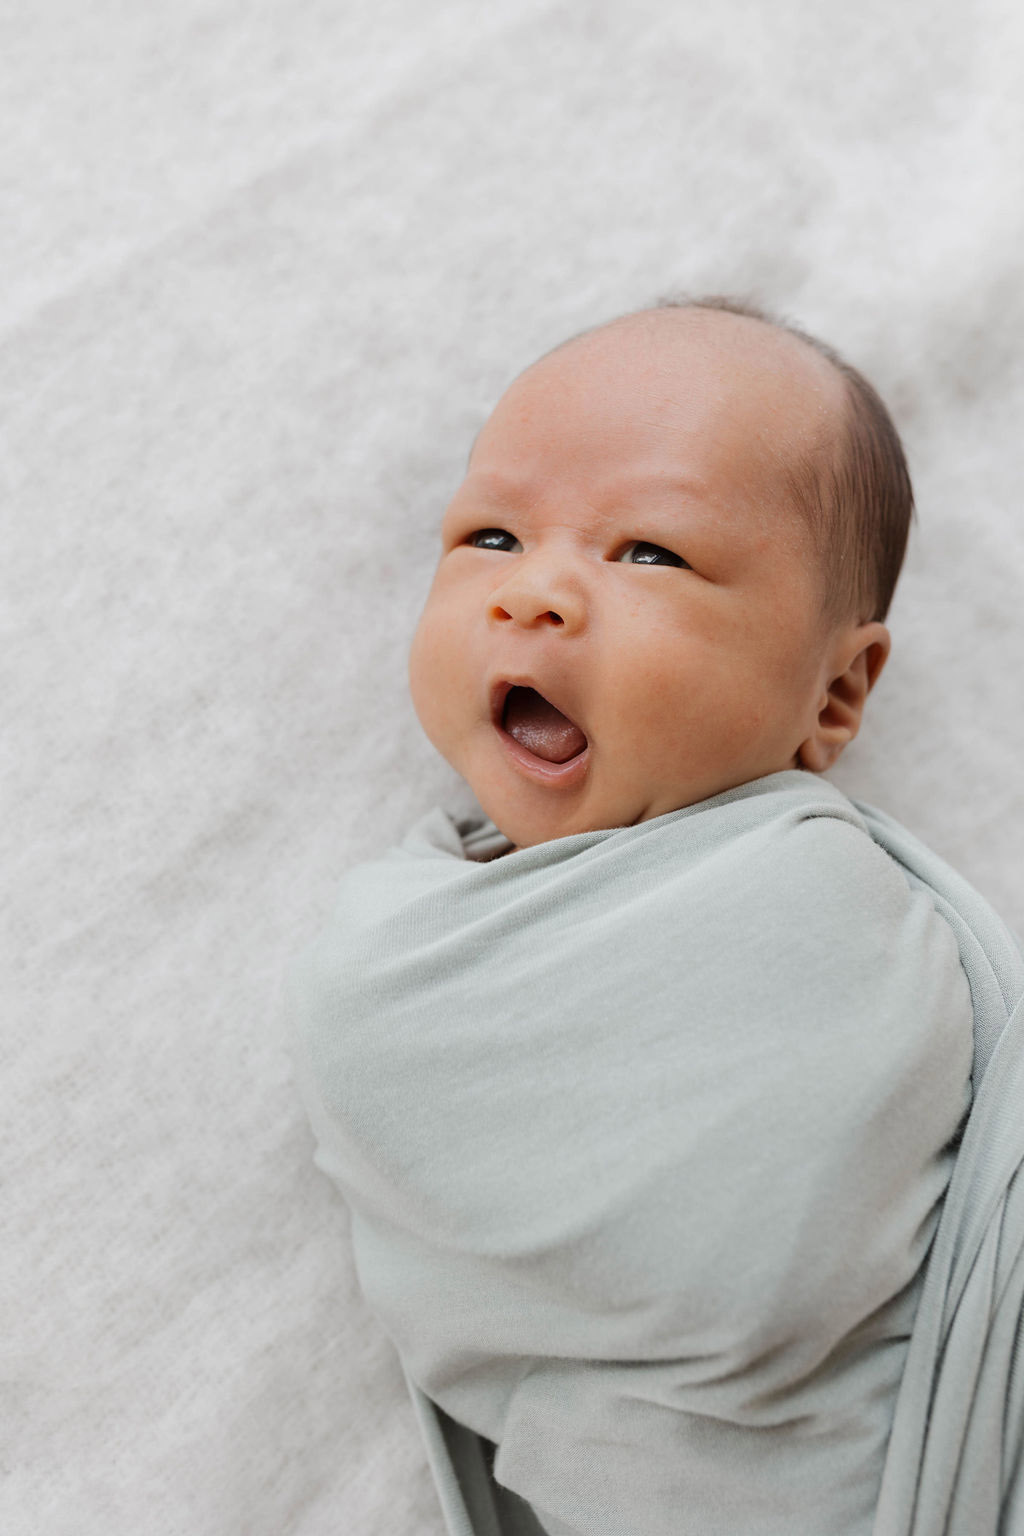 baby wrapped in a grey blanket yawning white background